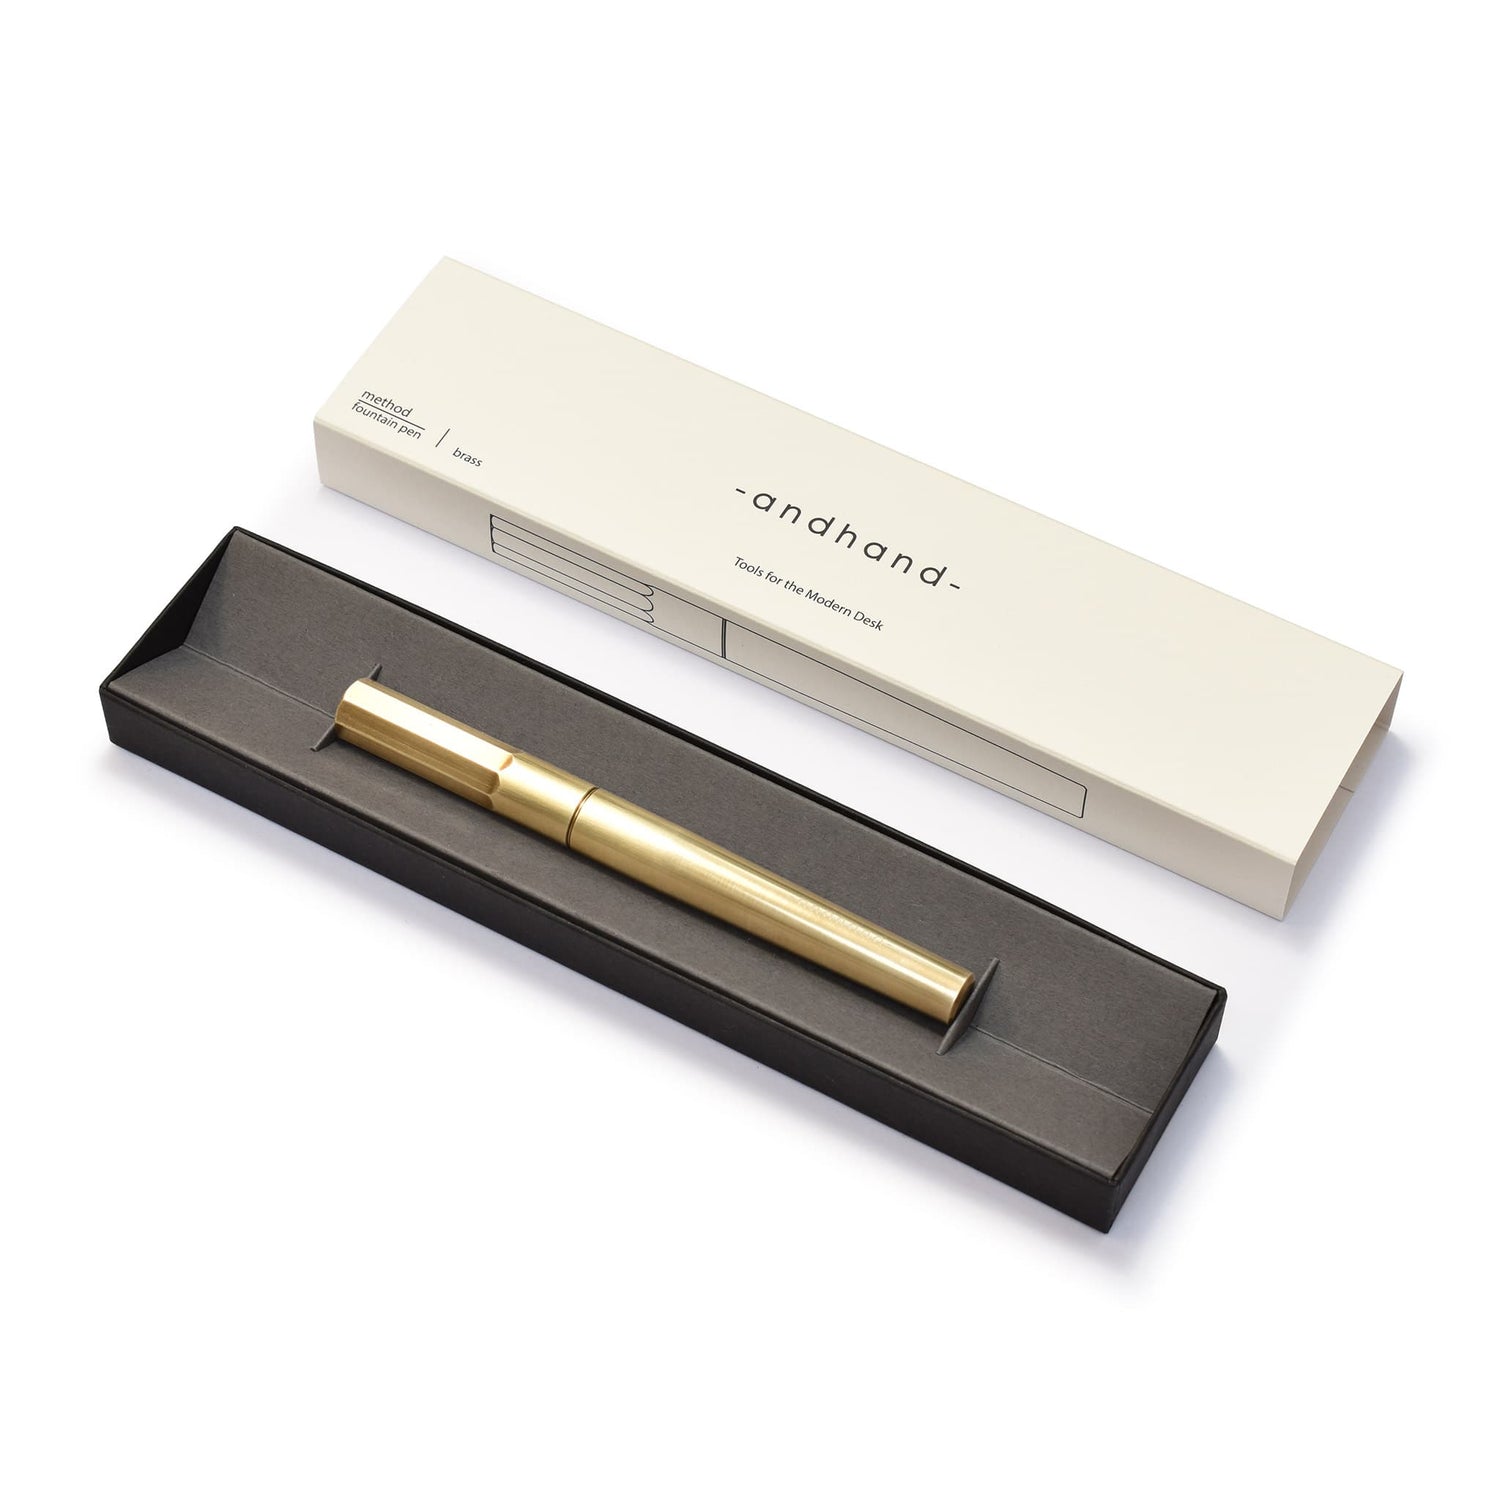 Black and Brass fountain pen in premium presentation box. Ideal for graduation, father's day or other special occasion.